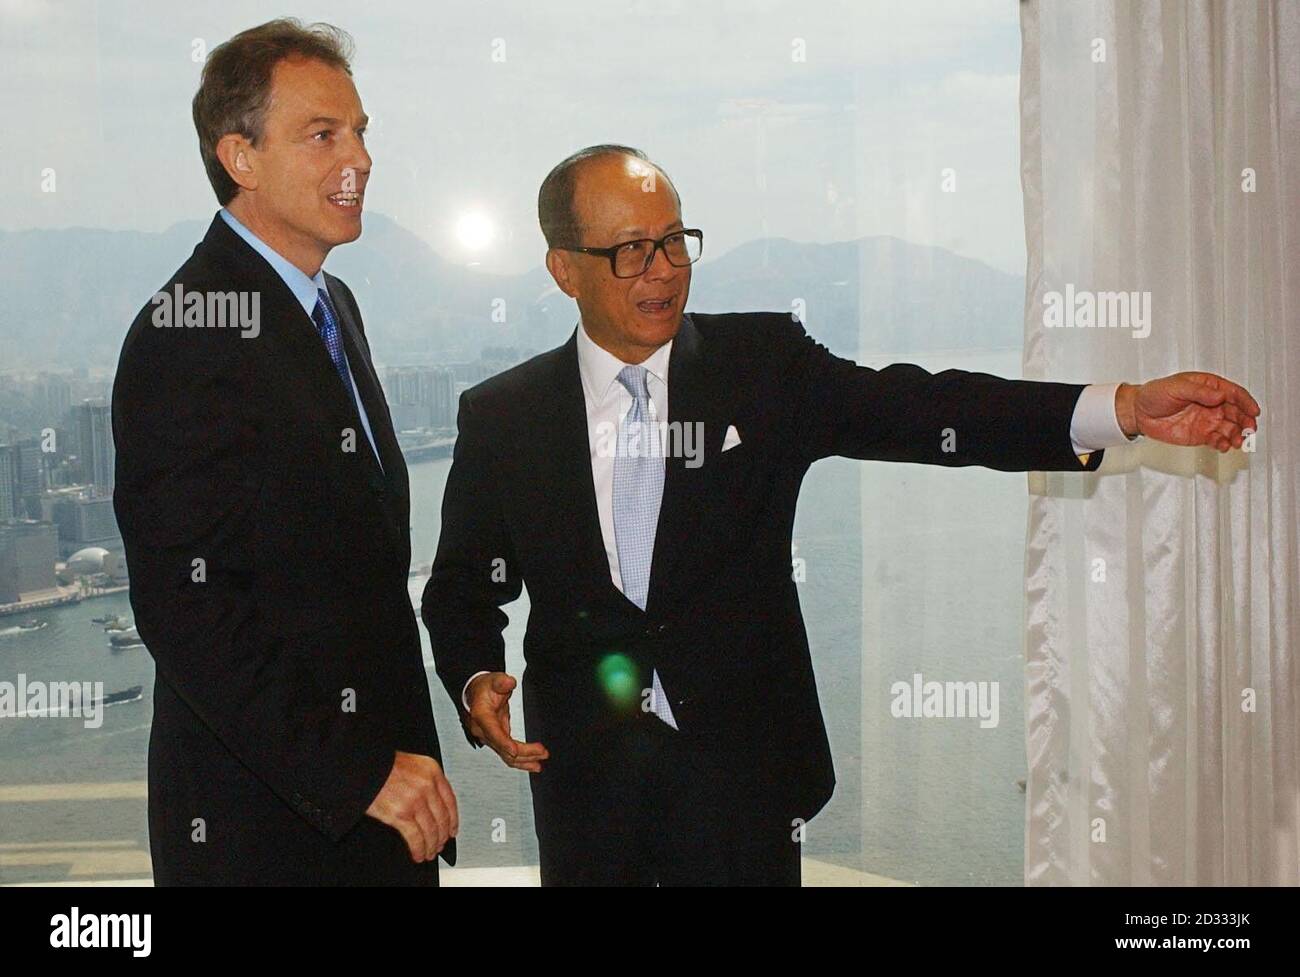 British Prime Minister Tony Blair with leading Hong Kong businessman Dr. Li Ka-Shing. Blair was flying home from Hong Kong, cutting short a Far East visit to avoid being stranded by a typhoon, acting on the advice of the captain of his British Airways chartered Boeing 777 jet. * Blair cancelled a programme of events scheduled for tonight and tomorrow and headed for Heathrow instead. Stock Photo